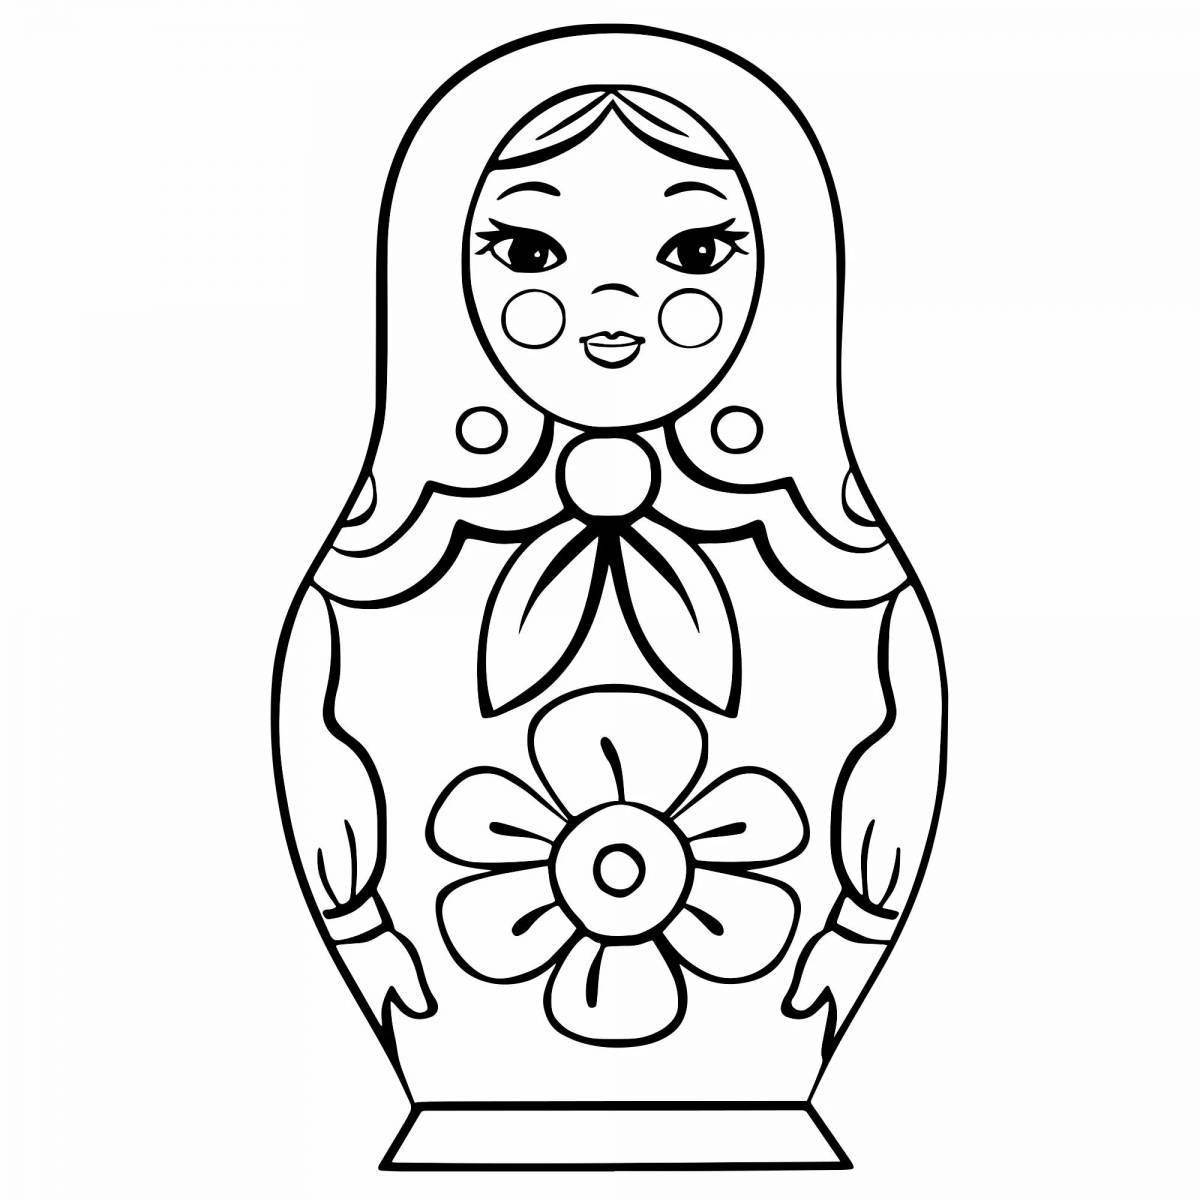 Coloring page glowing russian doll